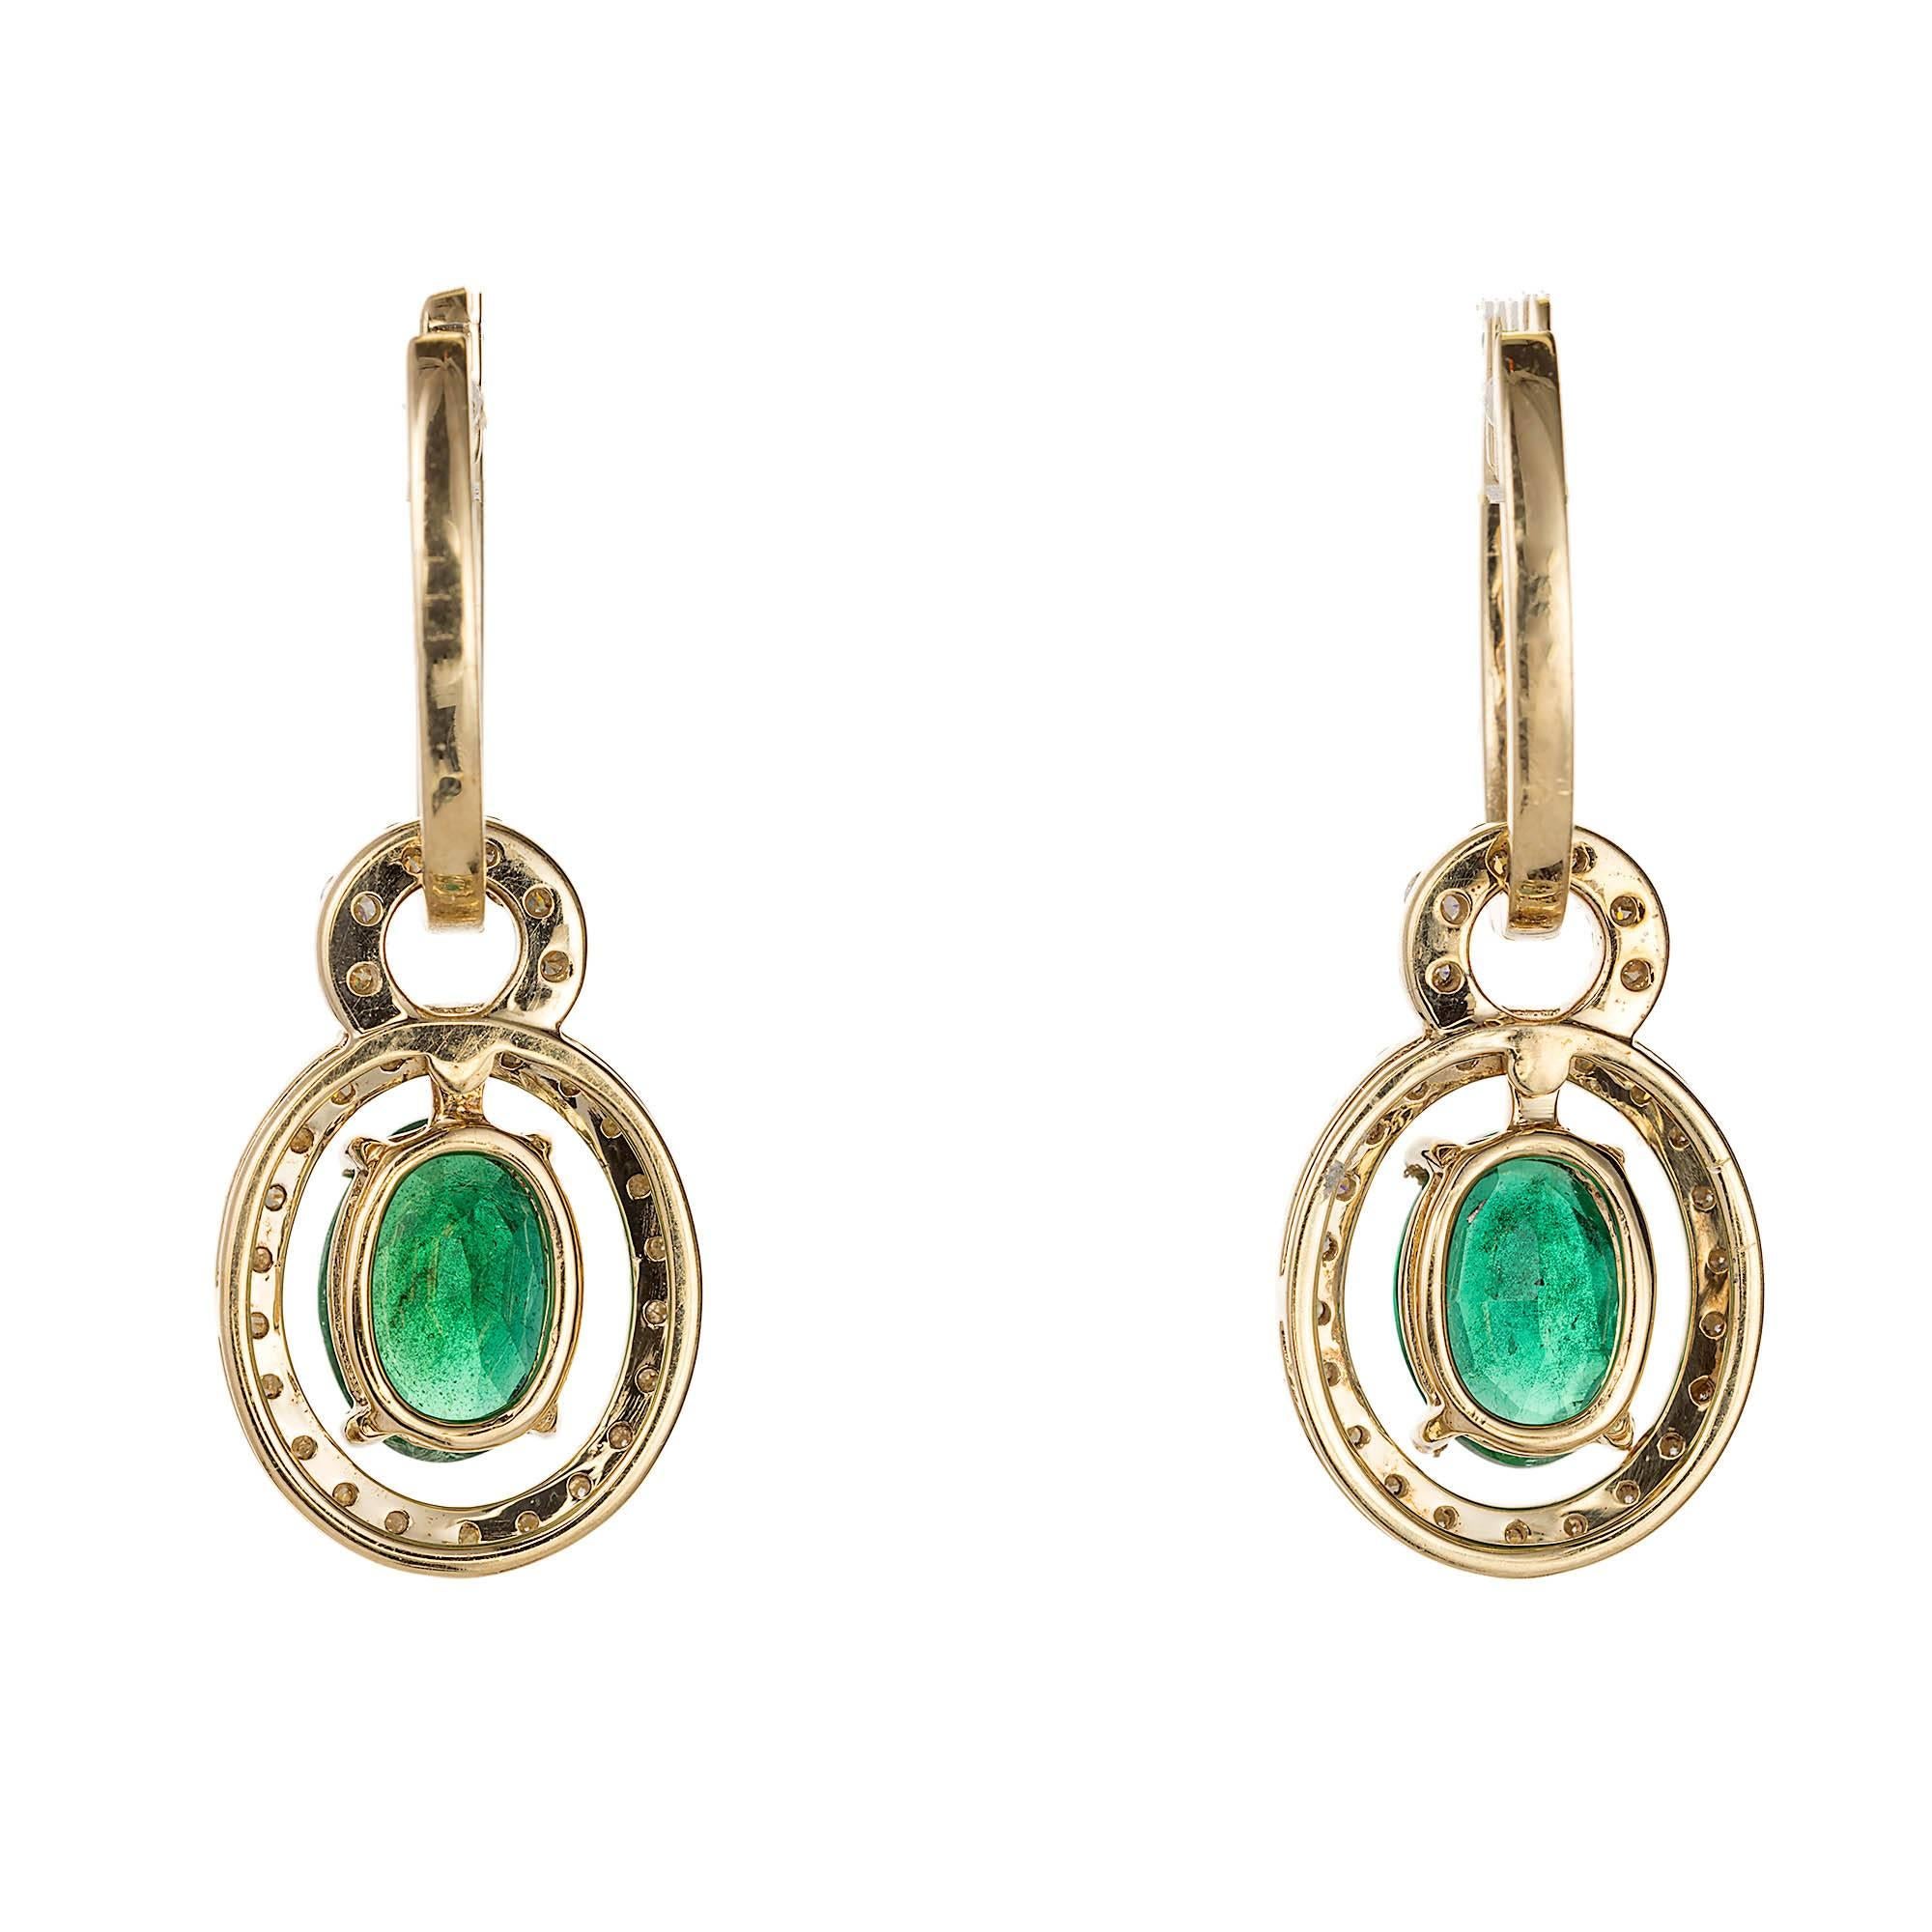 Beautiful huggie style diamond earrings in 14k yellow gold with removable Emerald and Diamond dangle sections. The diamonds are full cut, . The oval emeralds are deep green and bright. They have moderate natural inclusions.  The earrings are a total